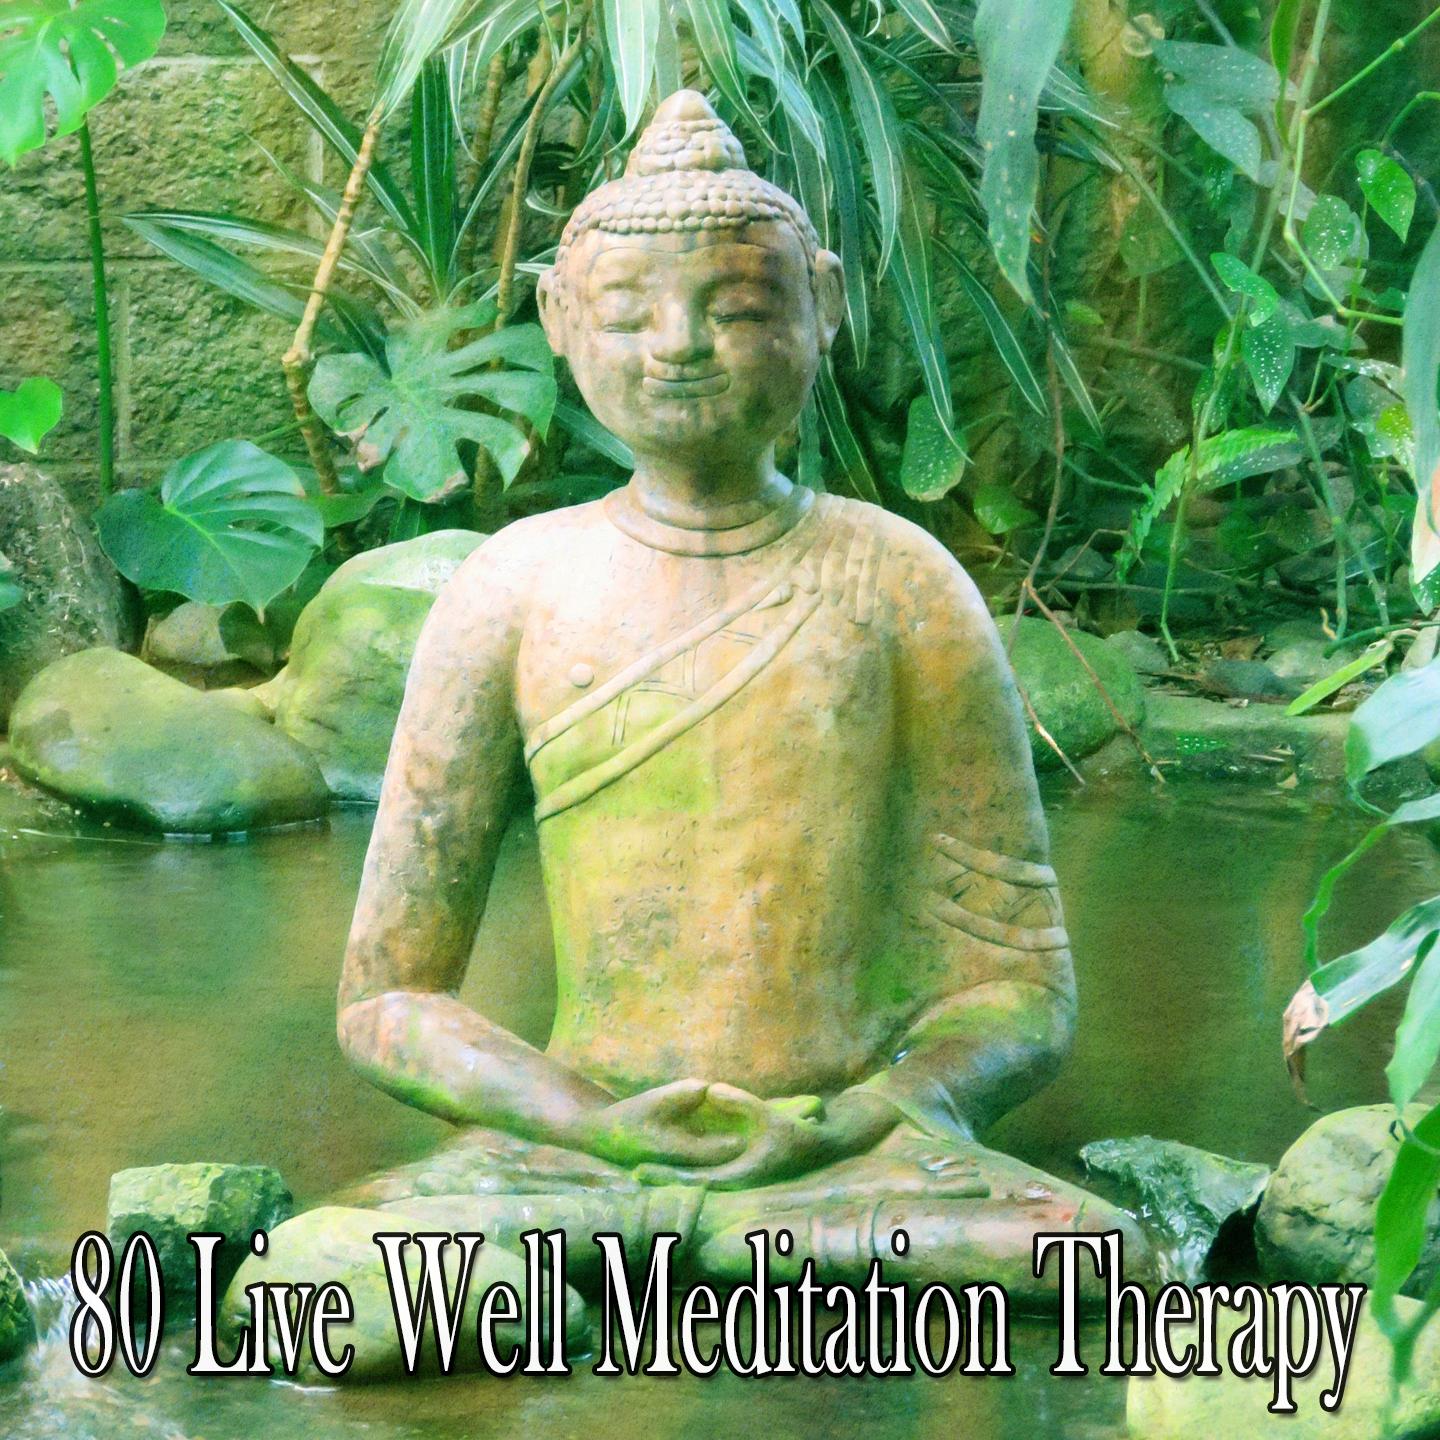 80 Live Well Meditation Therapy